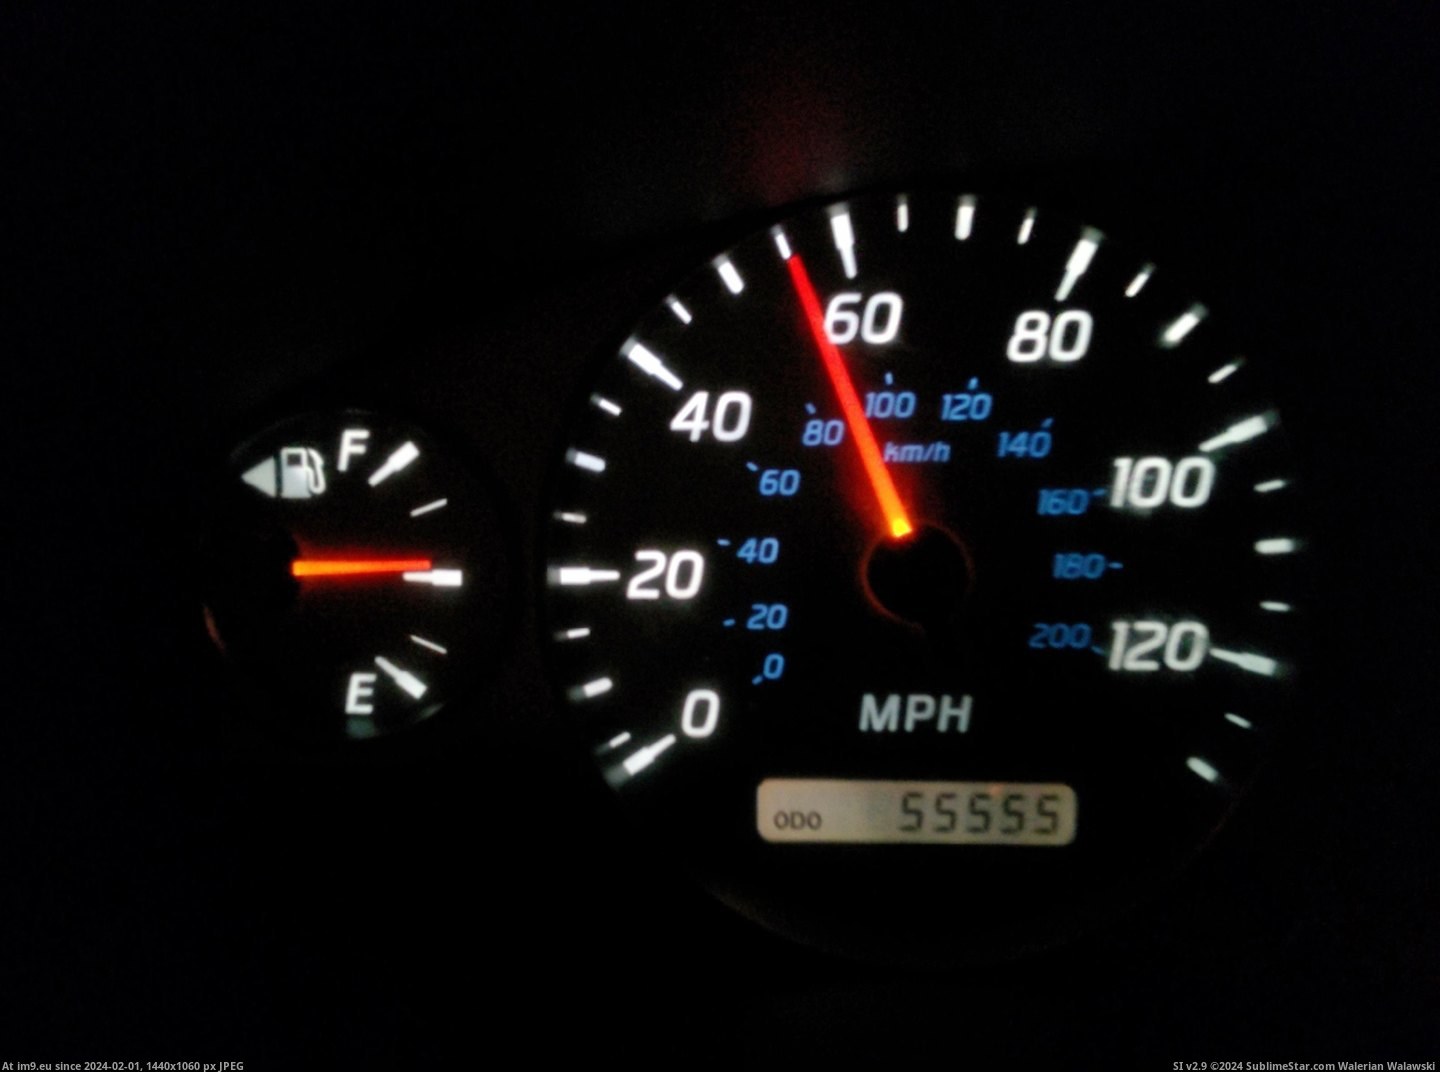 #Gas #Miles #Odometer #Tank #Mph [Mildlyinteresting] 55555 miles on my odometer, going 55 mph, with just under 55% of gas in my tank. Pic. (Image of album My r/MILDLYINTERESTING favs))